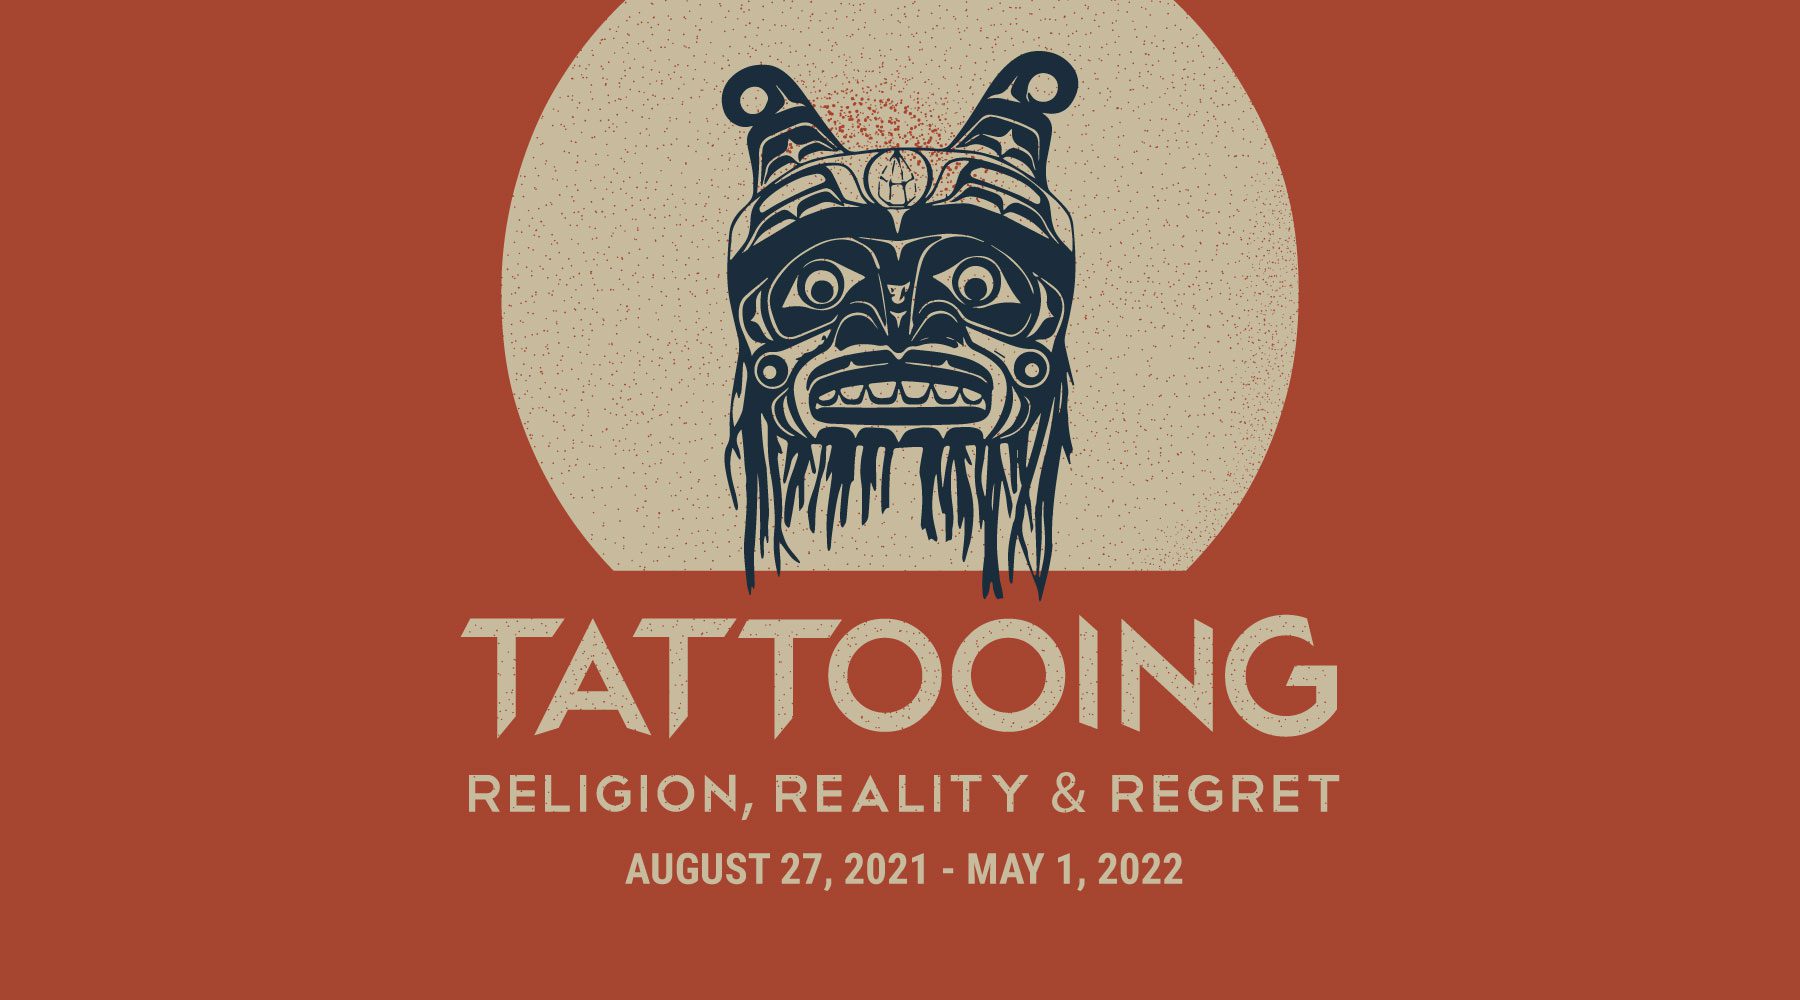 Tattooing: Religion, Reality and Regret